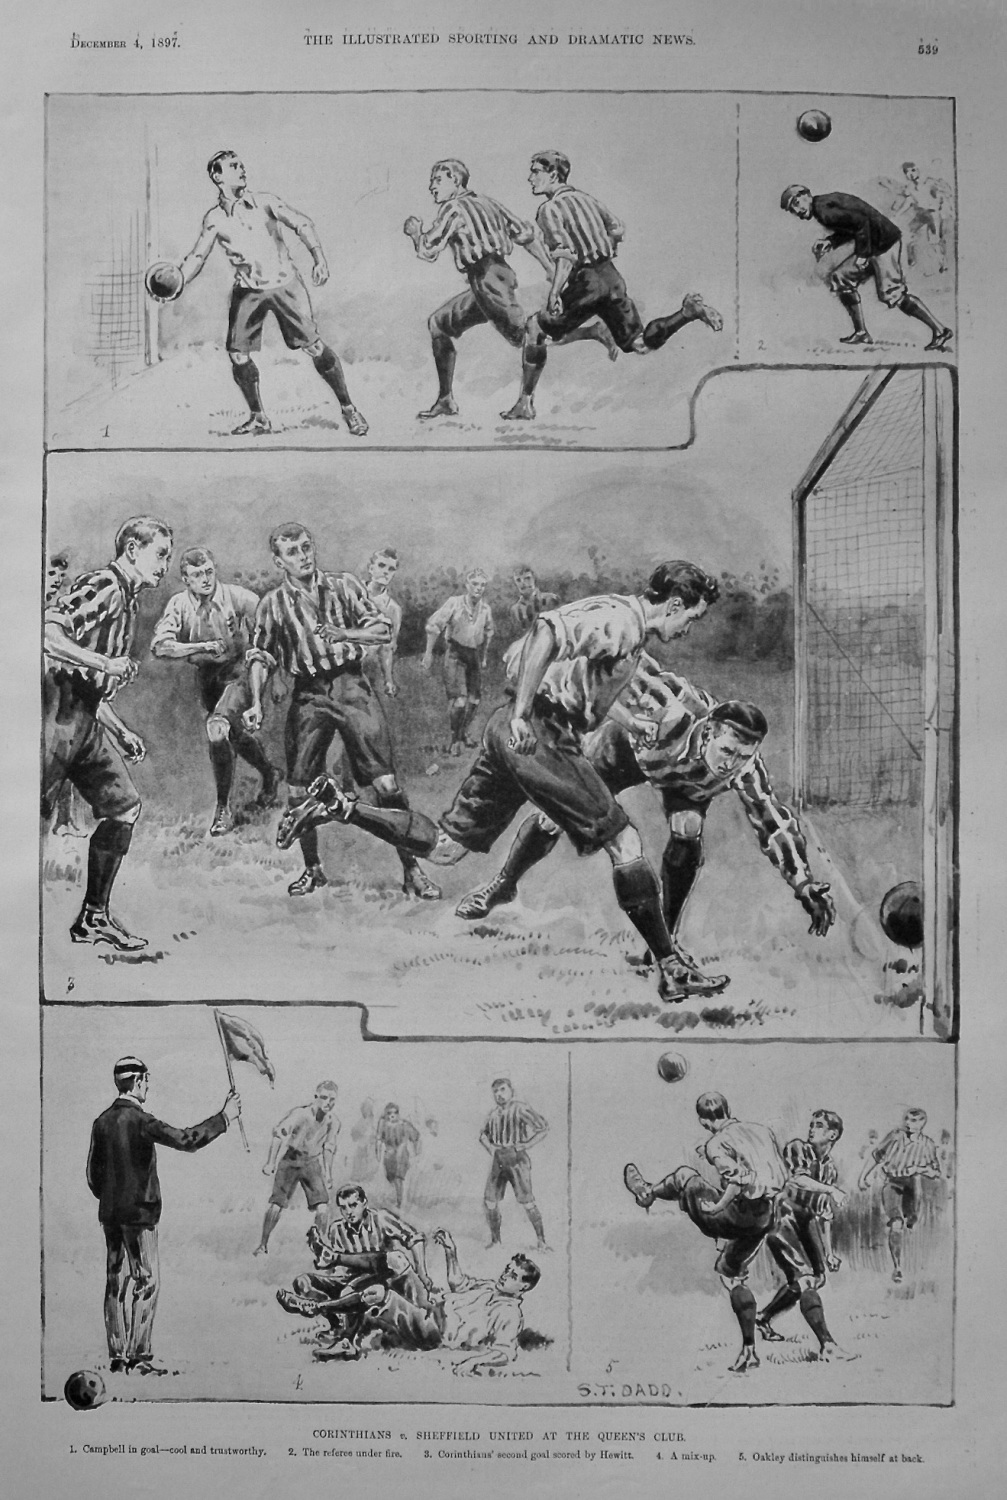 Corinthians v. Sheffield United at the Queen's Club. (Football) 1897.